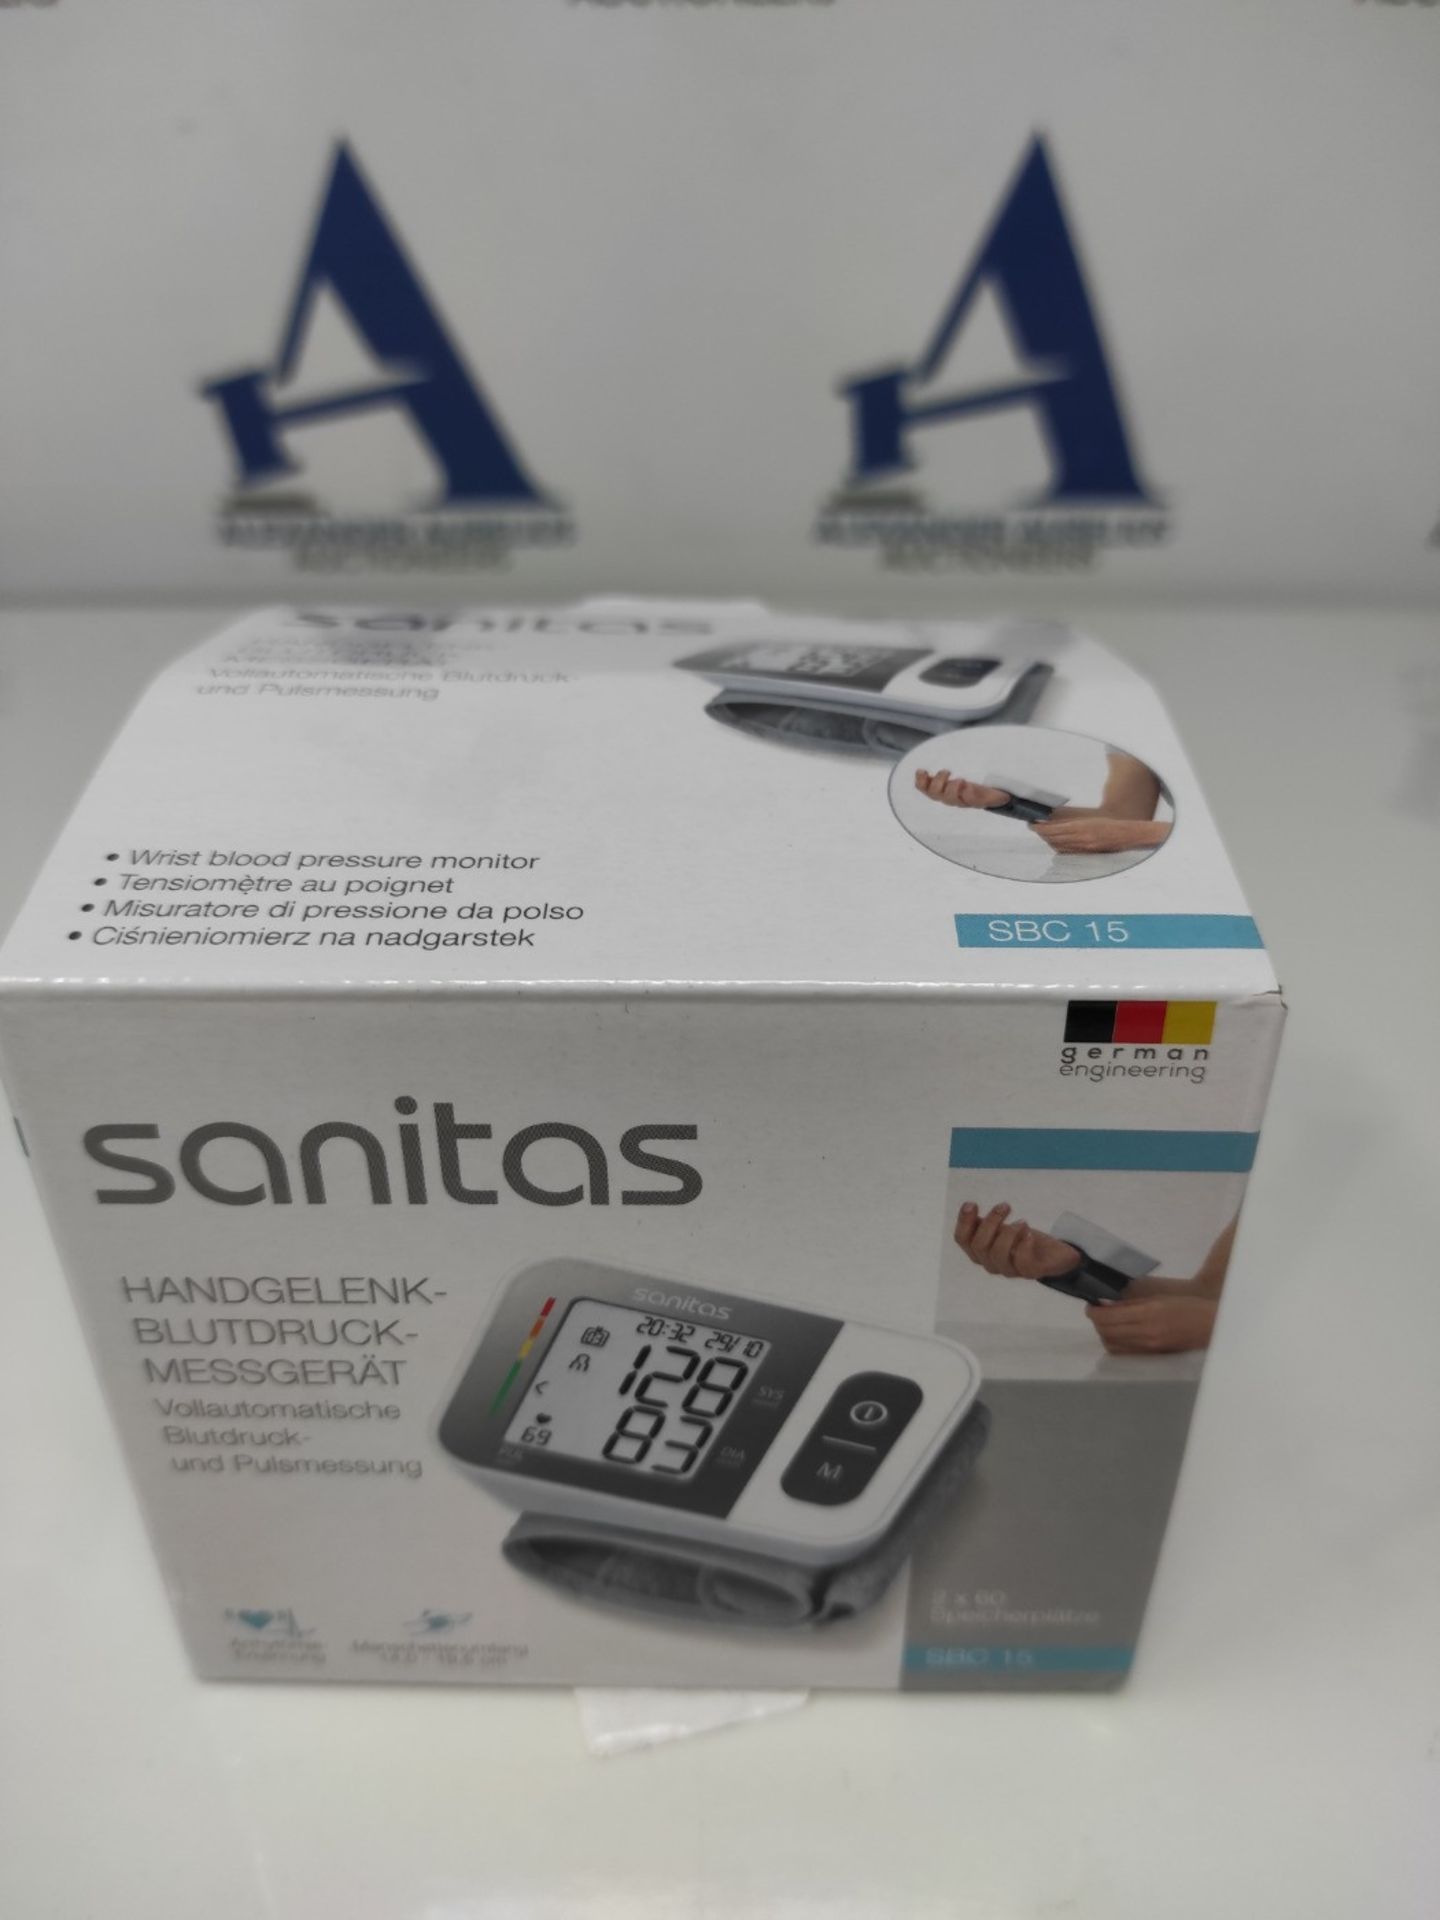 Sanitas SBC 15 wrist blood pressure monitor, fully automatic blood pressure and pulse - Image 2 of 6